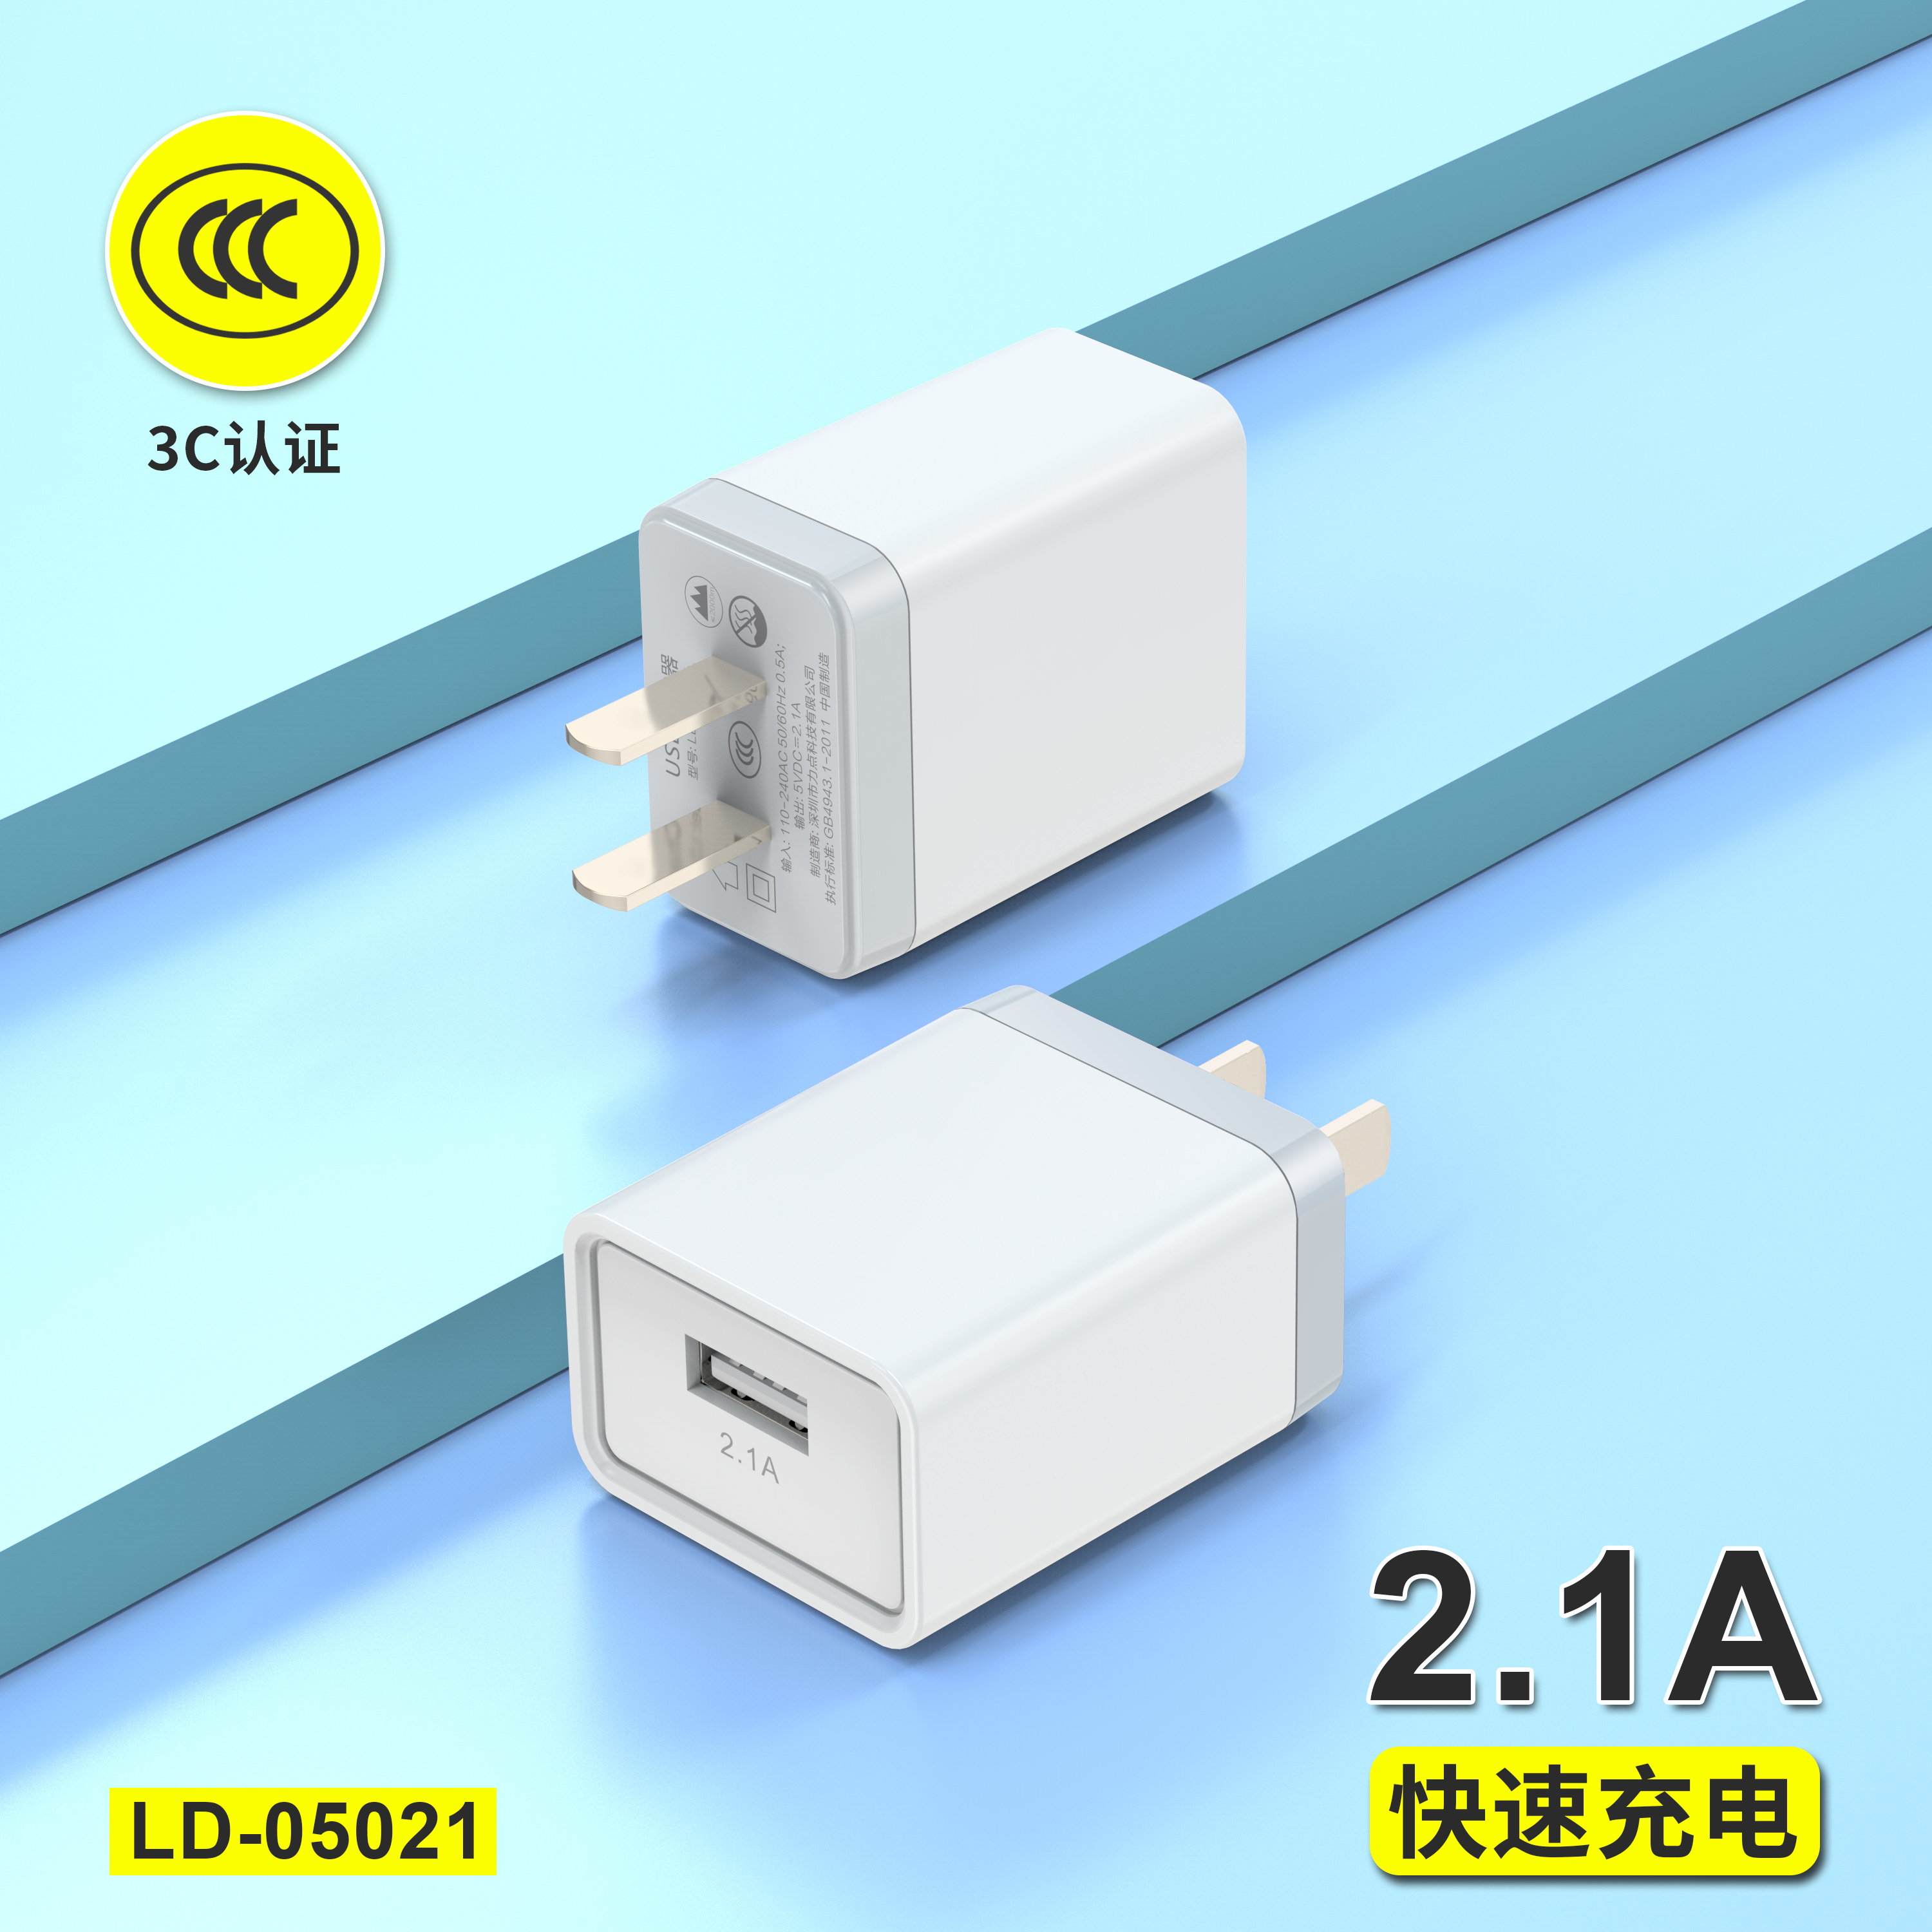 5V2A mobile phone charger Manufacturers, 5V2A mobile phone charger Factory, Supply 5V2A mobile phone charger